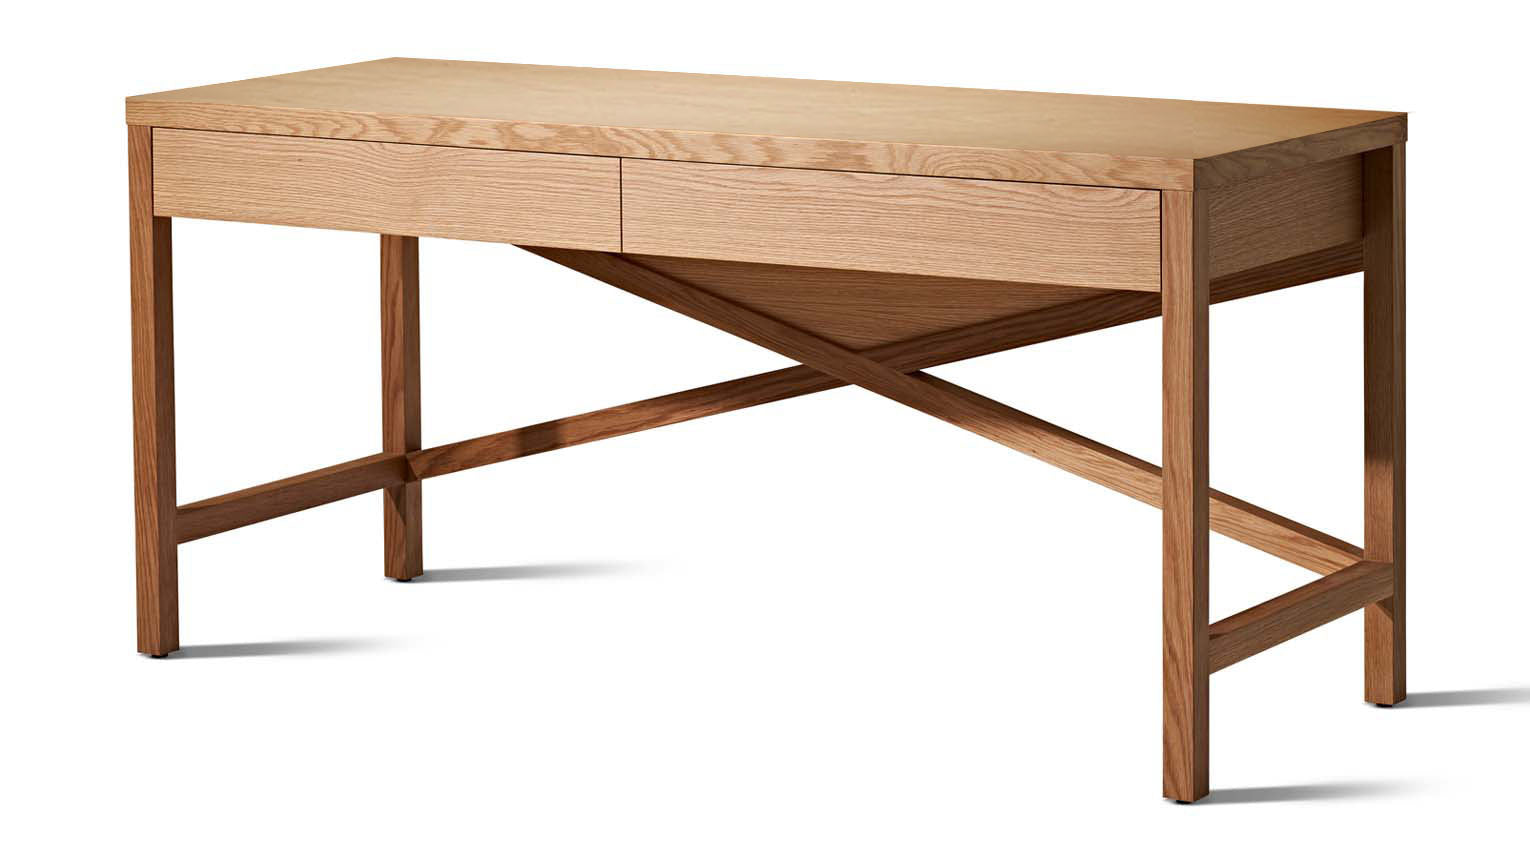 Traverse Desk With Drawers - Zuster Furniture